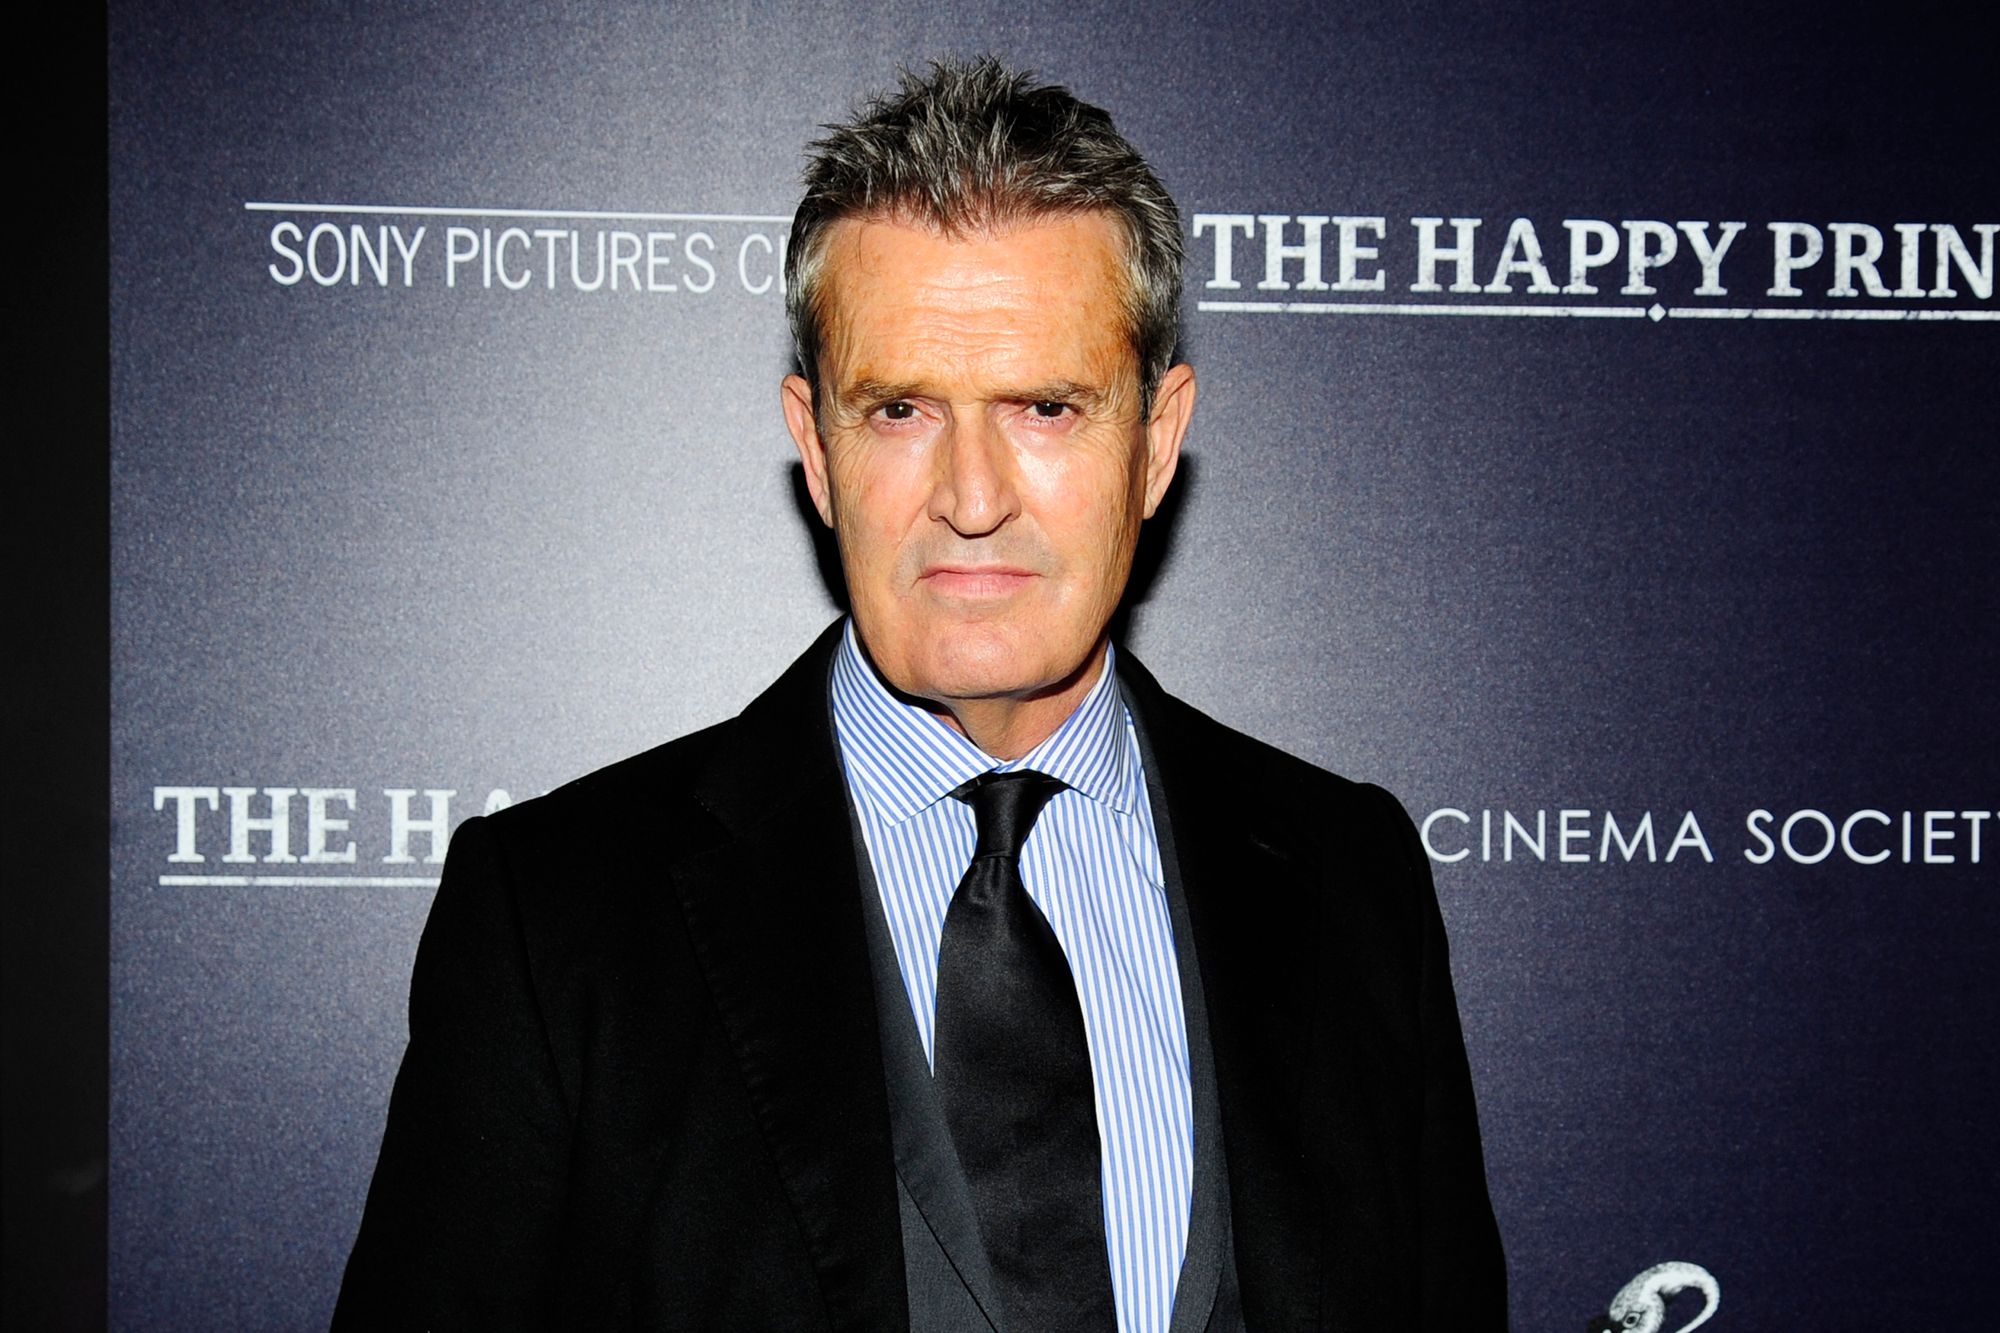 Rupert Everett to replace Eddie Izzard in 'Who's Afraid of Virginia